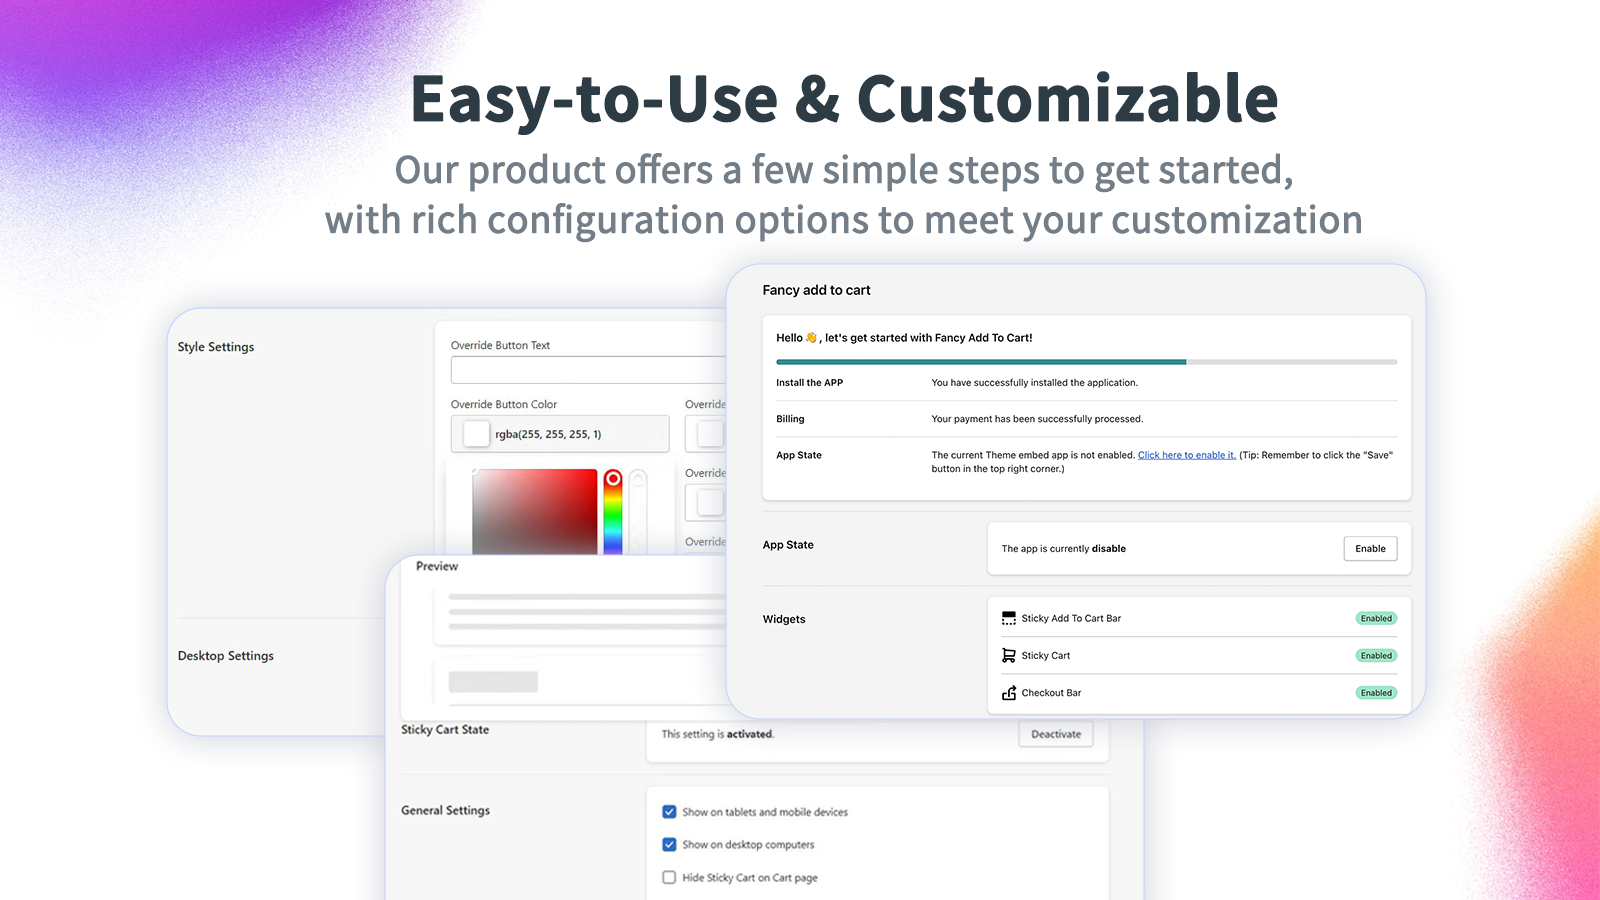 Easy-to-Use & Customizable